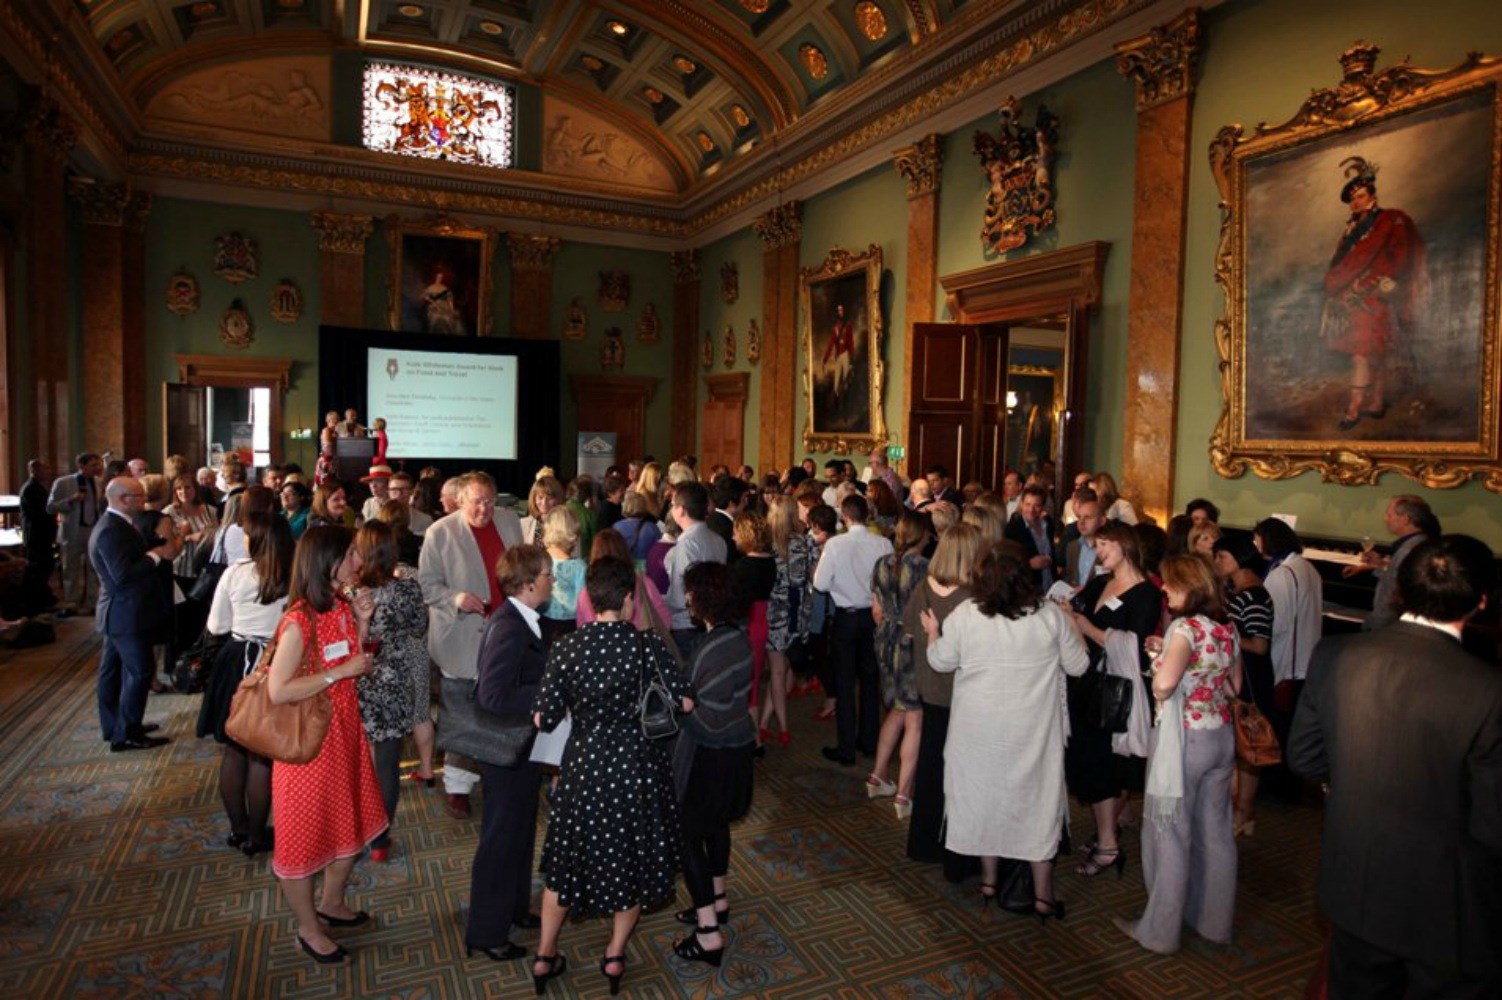 Guests in the Banqueting Hall at Fishmongers' Hall